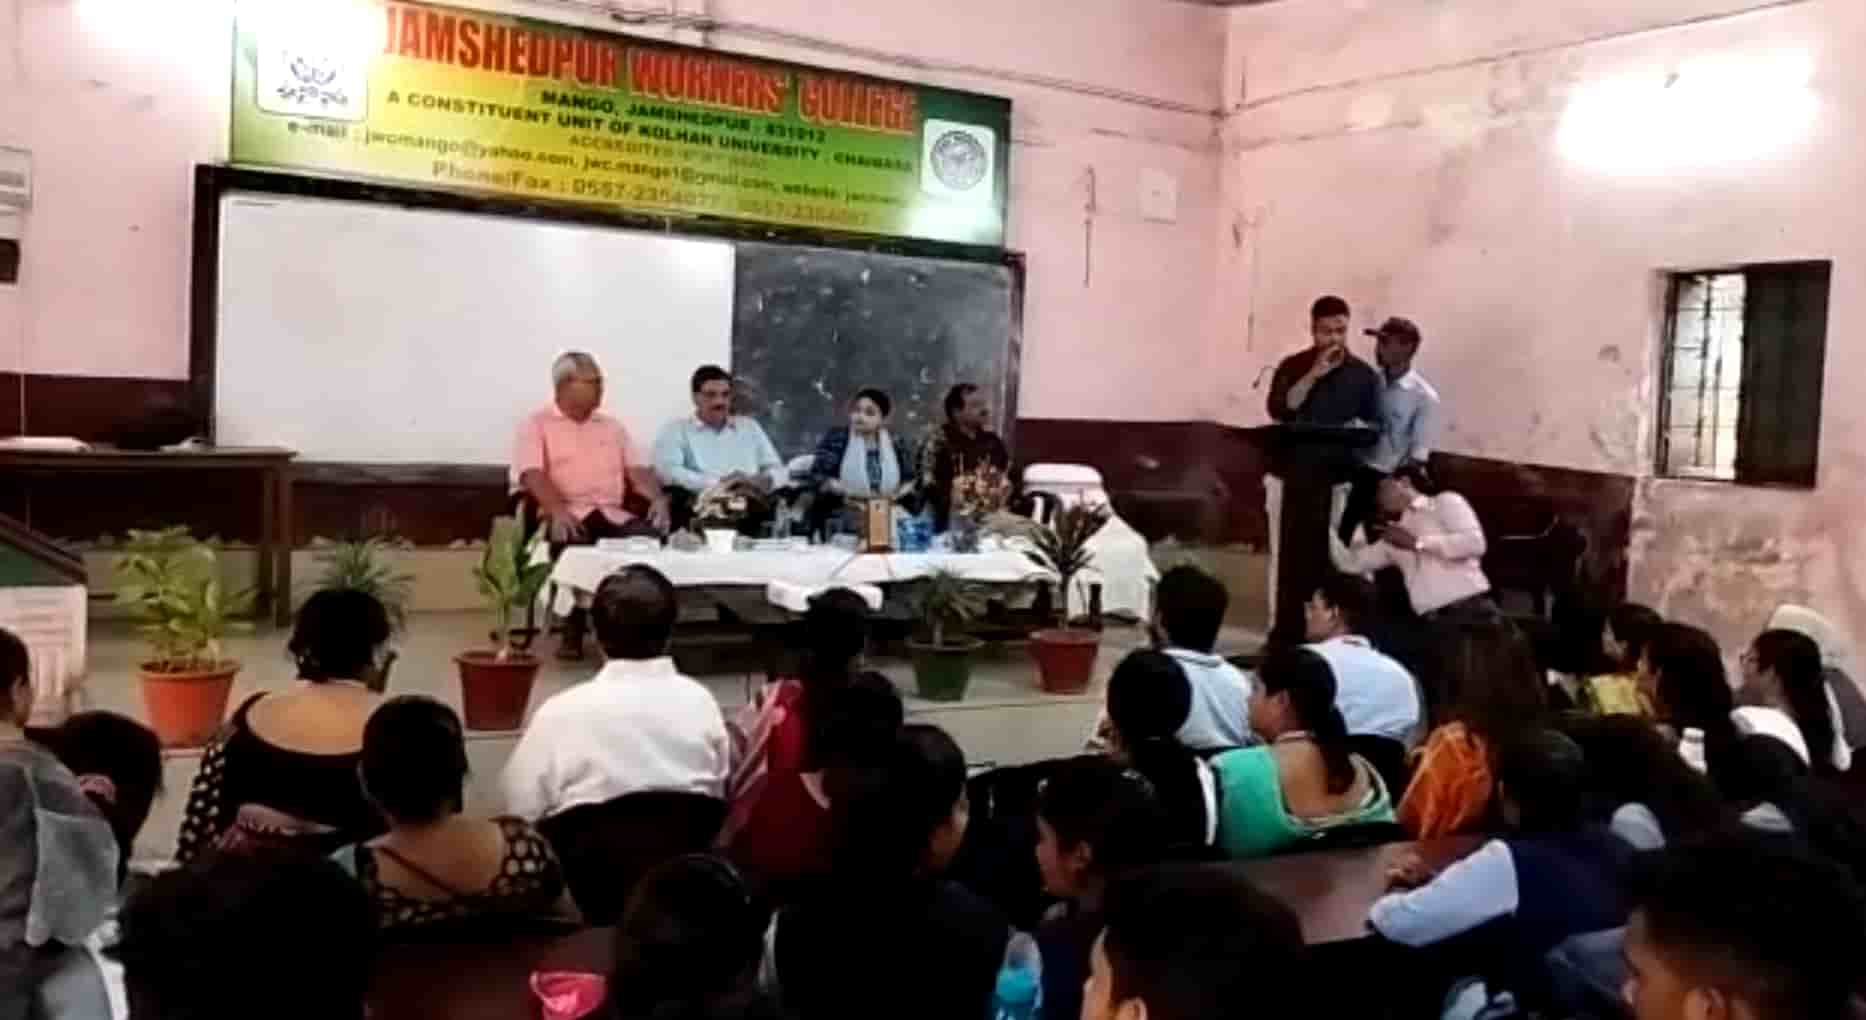 jwc Workers College in Mango Jamshedpur celebrated Environment Day emphasizing environmental conservation through speeches plays and interactive sessions DFO Mamta Priyadarshi attended the event as the chief guest Town Post